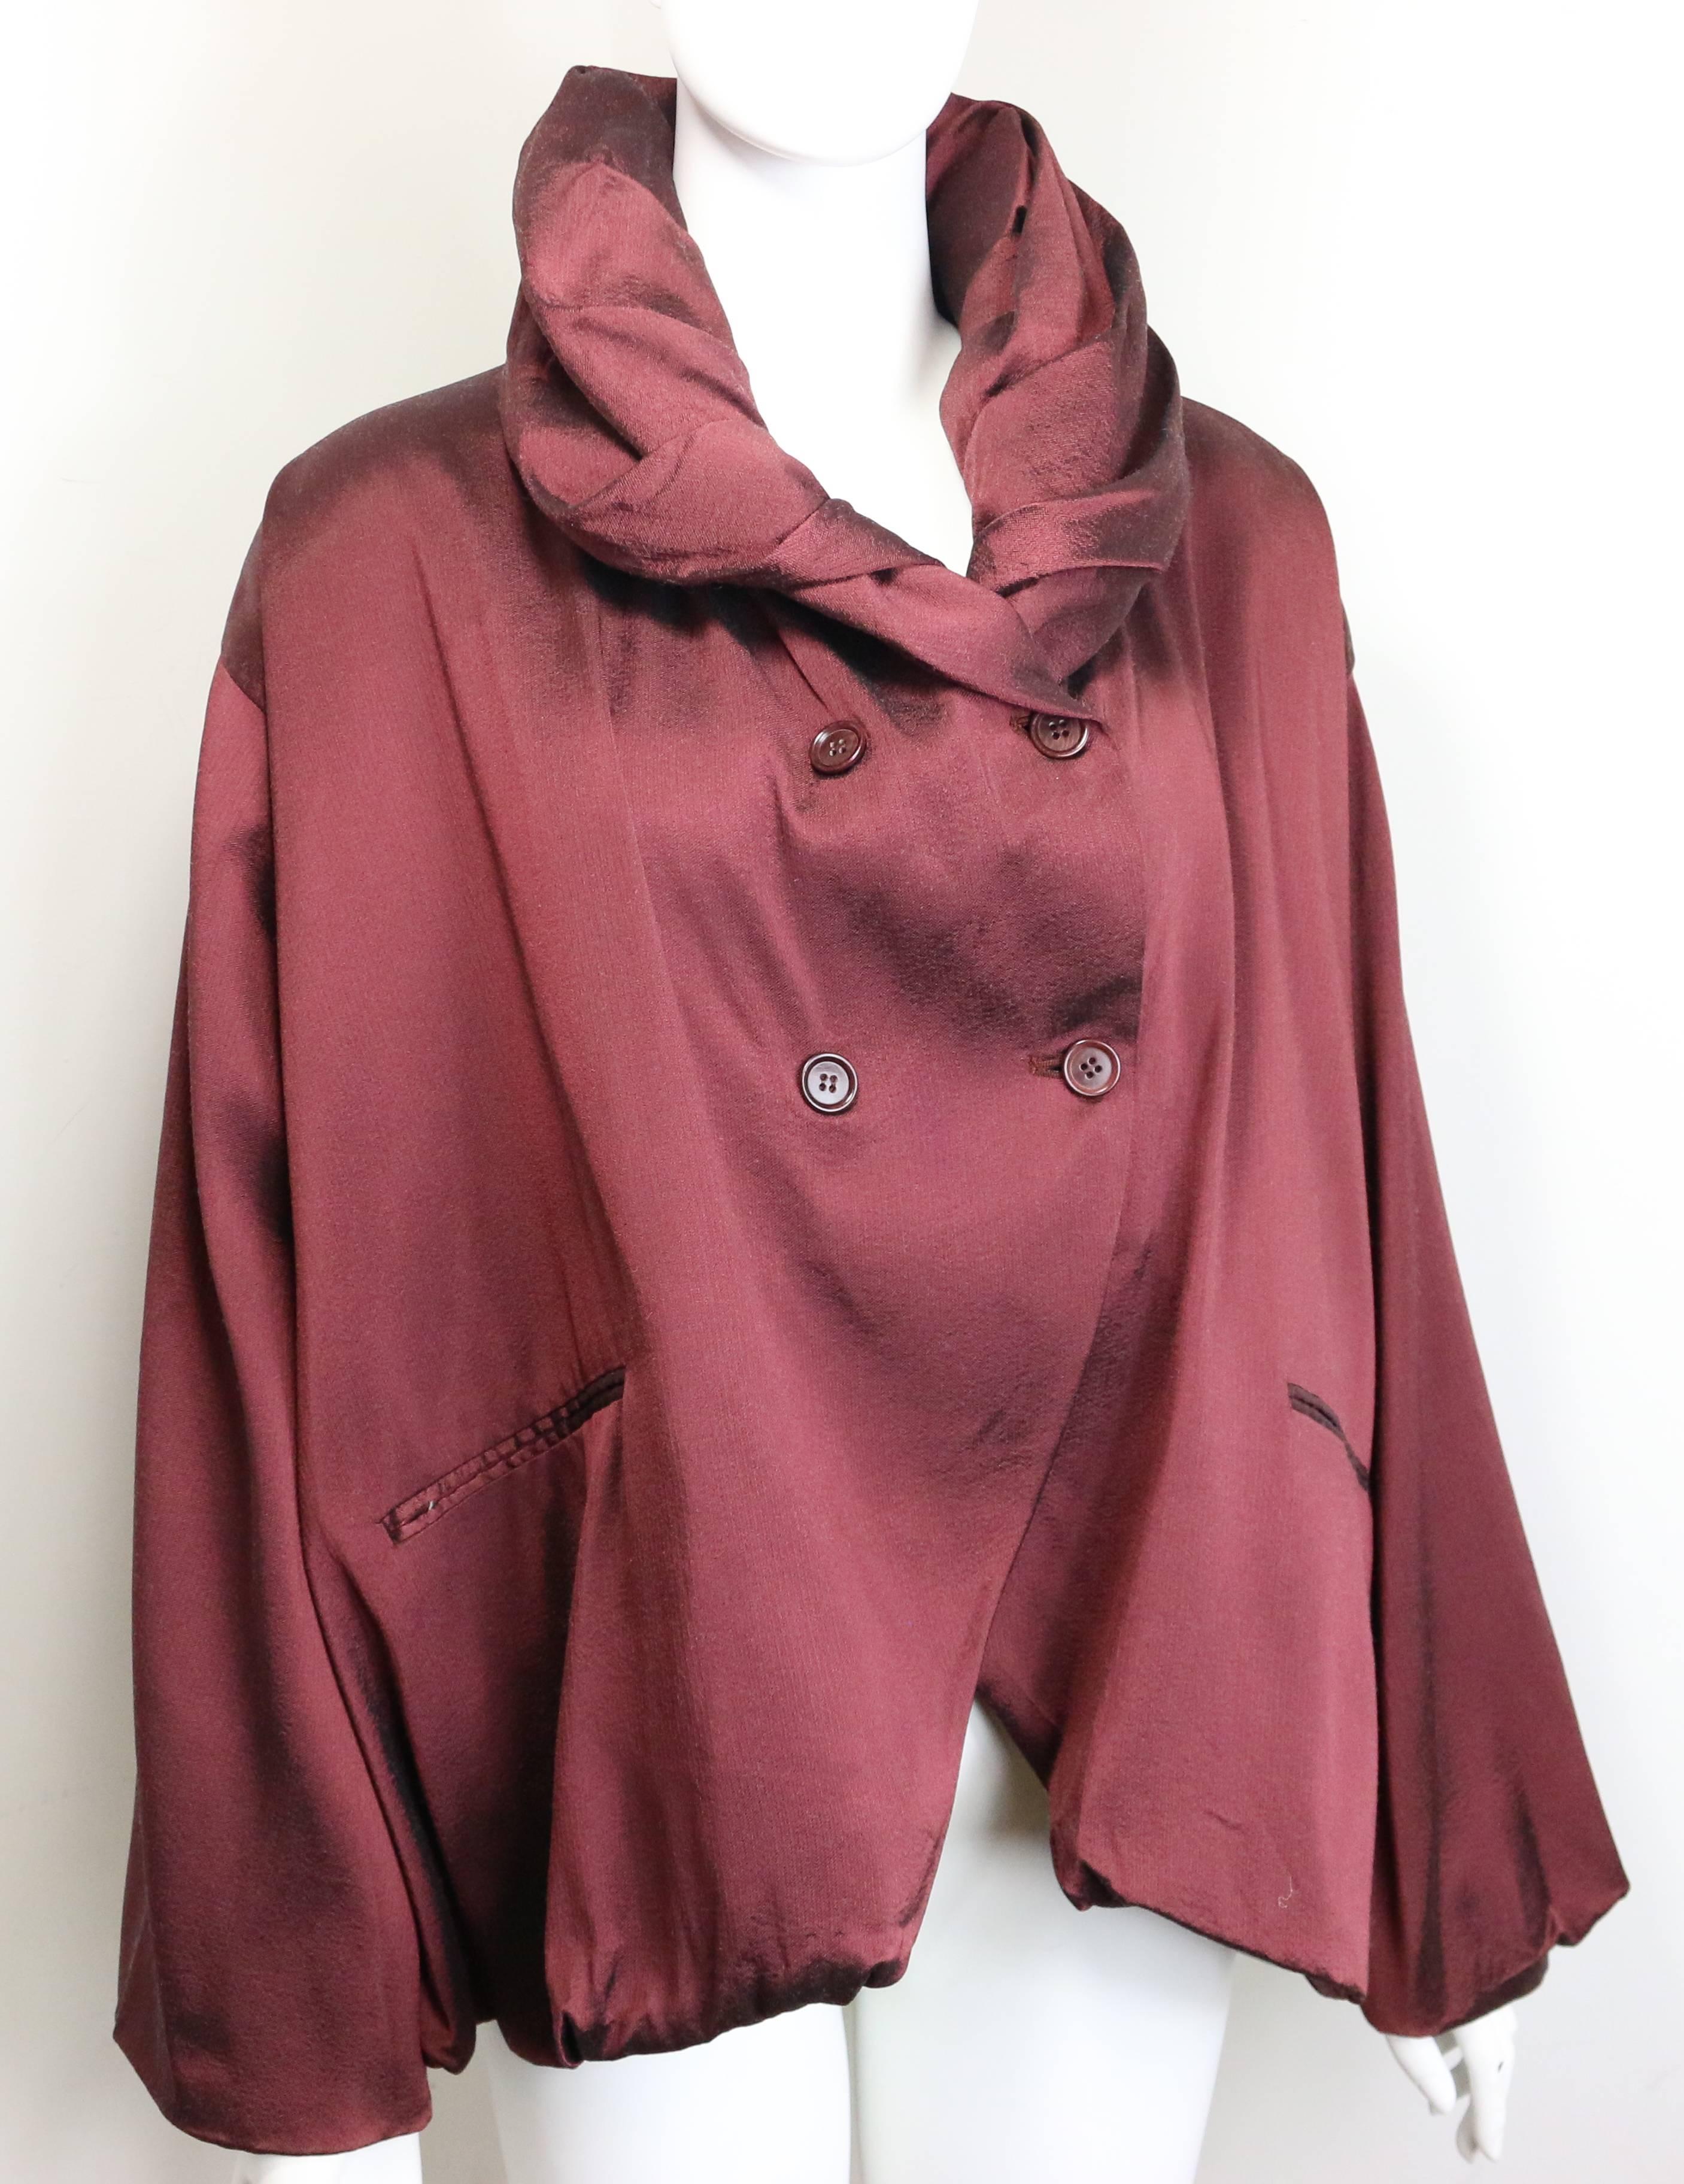 - Vintage 90s Romeo Gigli maroon silk cocoon double breasted coat. Featuring stand up shawl collar which you can fold into different forms. Four buttons closure. Two welt pockets. This is Romeo's  signature style which is romantic, dropped shoulders